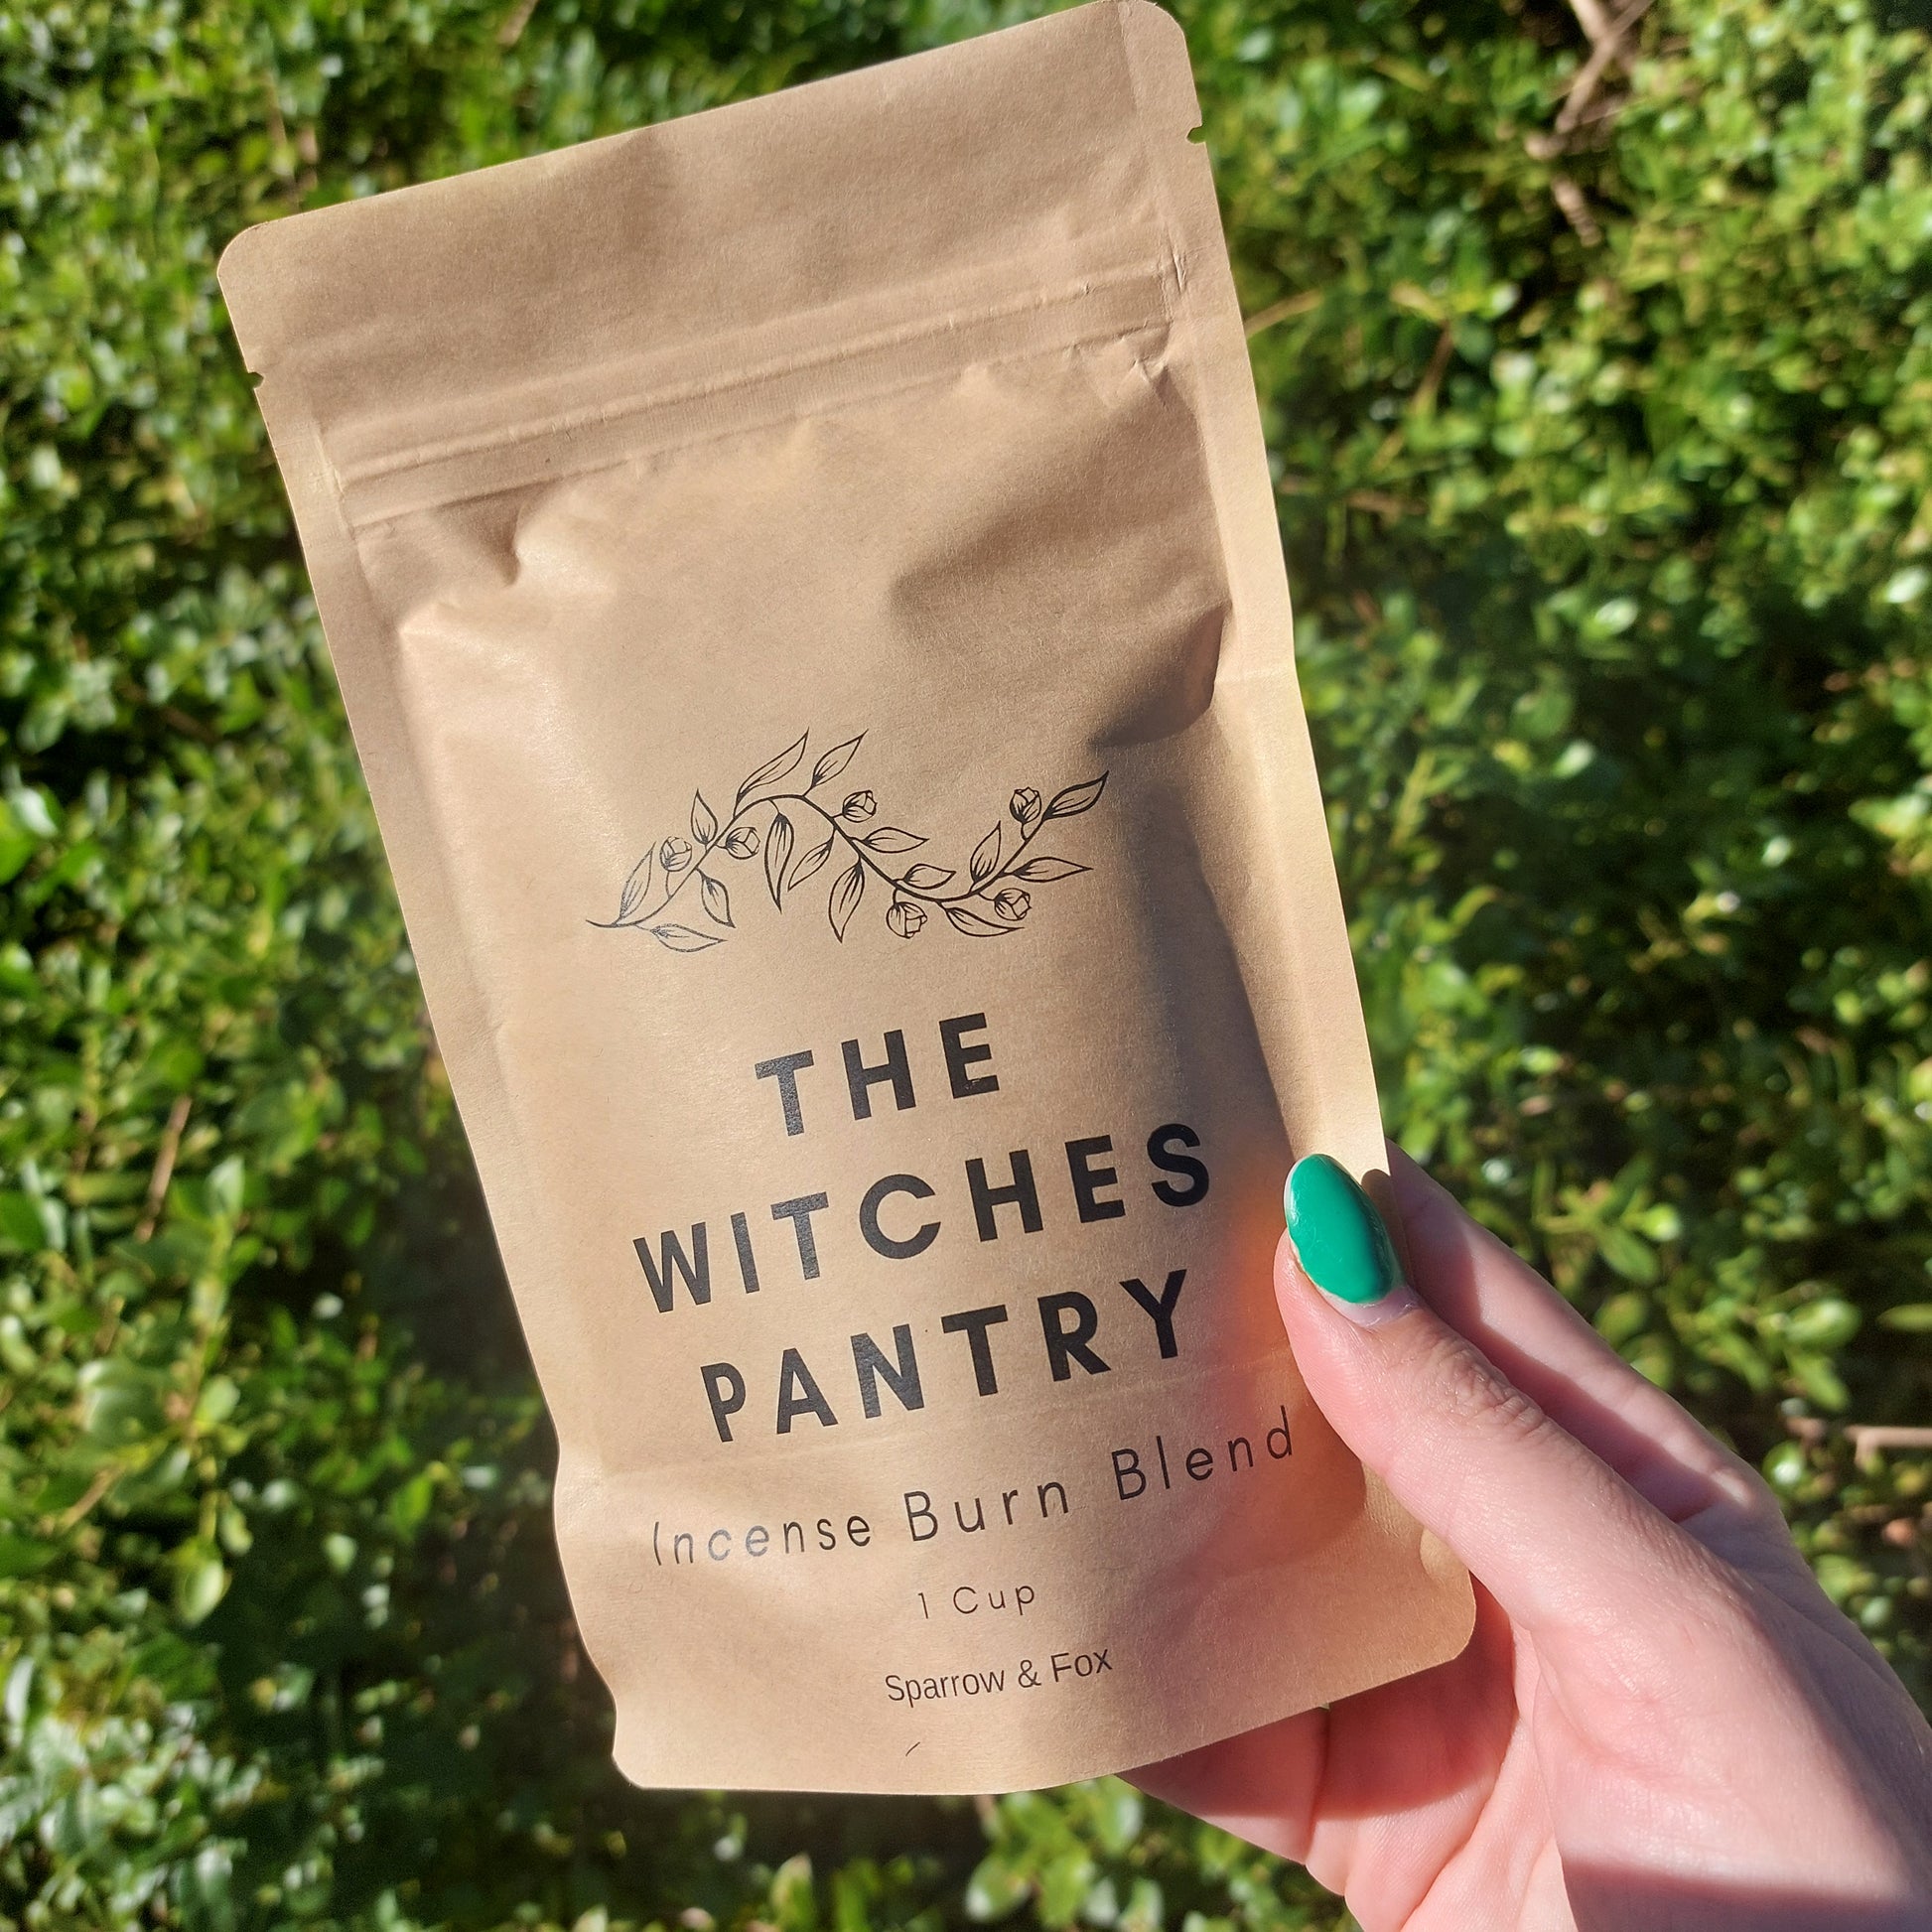 Loose Incense House Blend - The Witches Pantry - Sparrow and Fox